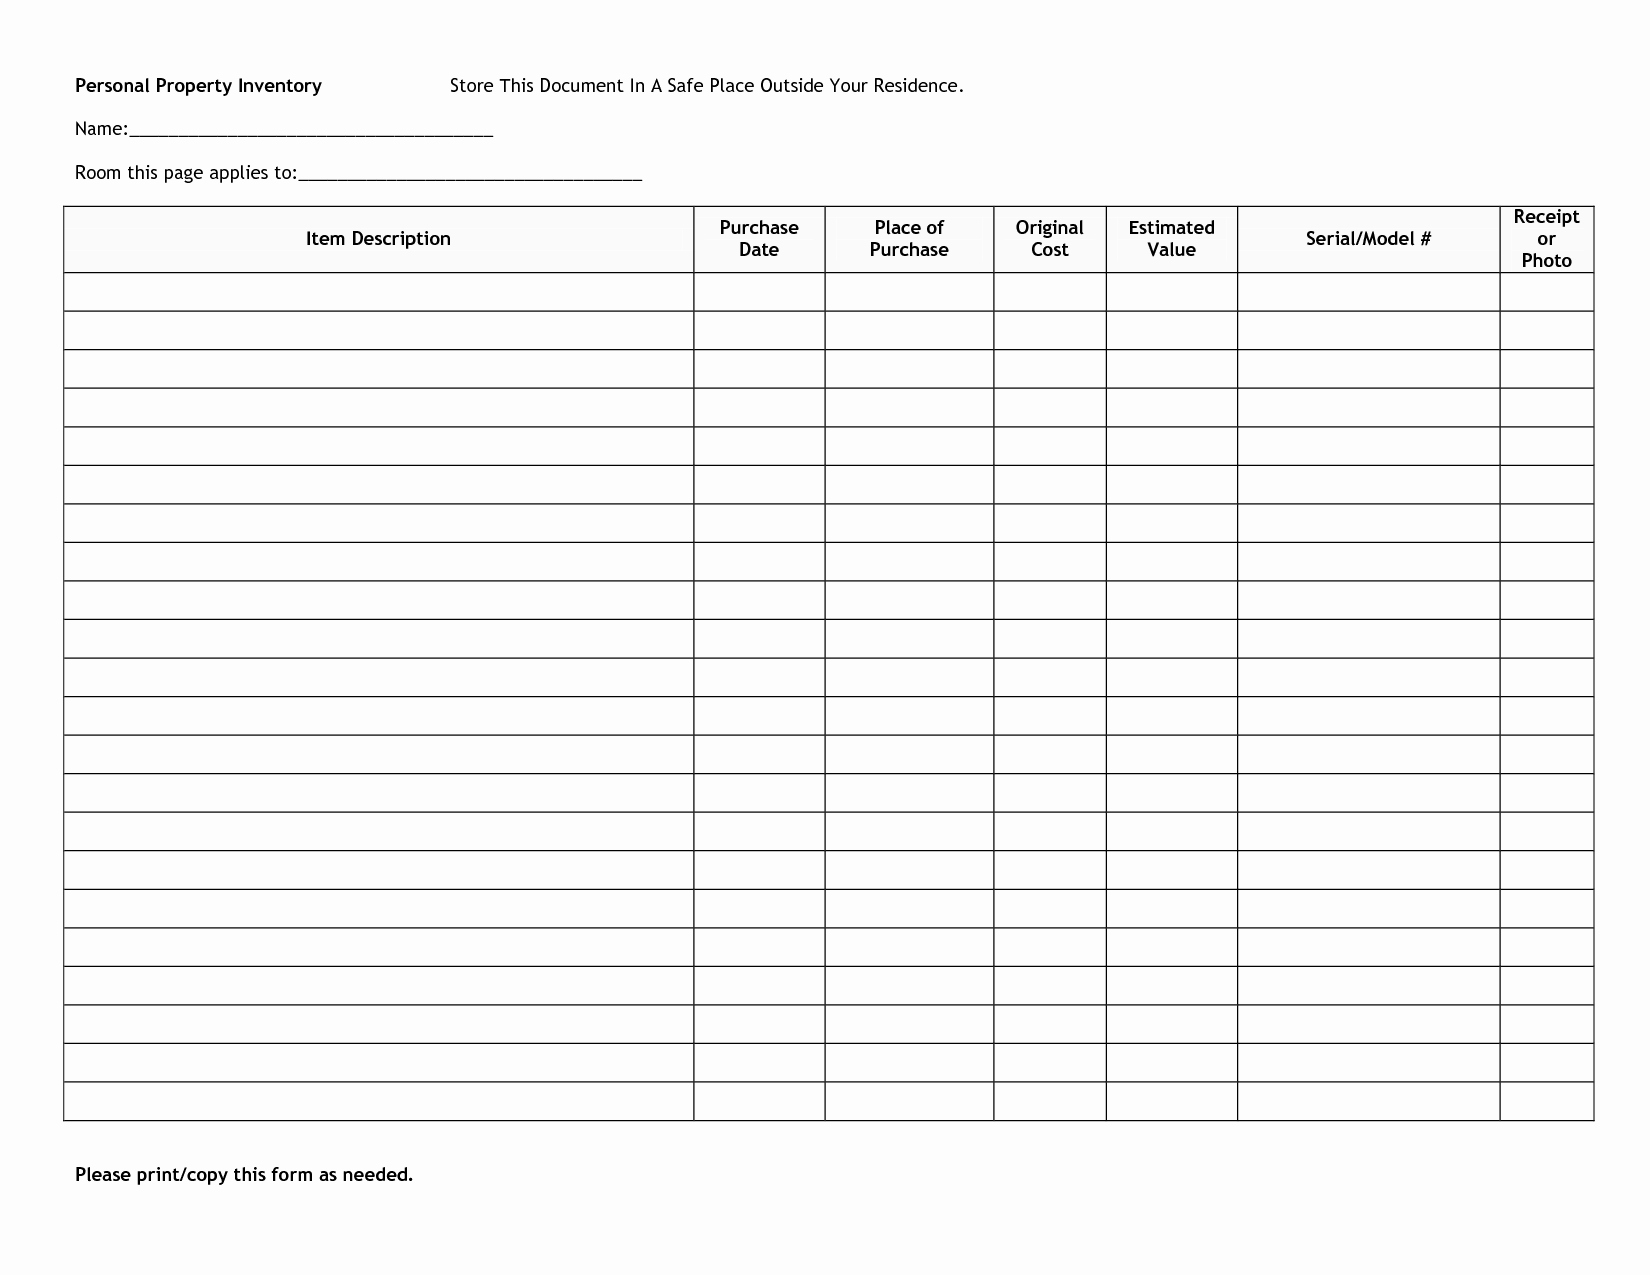 Personal Property Inventory Template Awesome Personal Home Inventory Worksheet